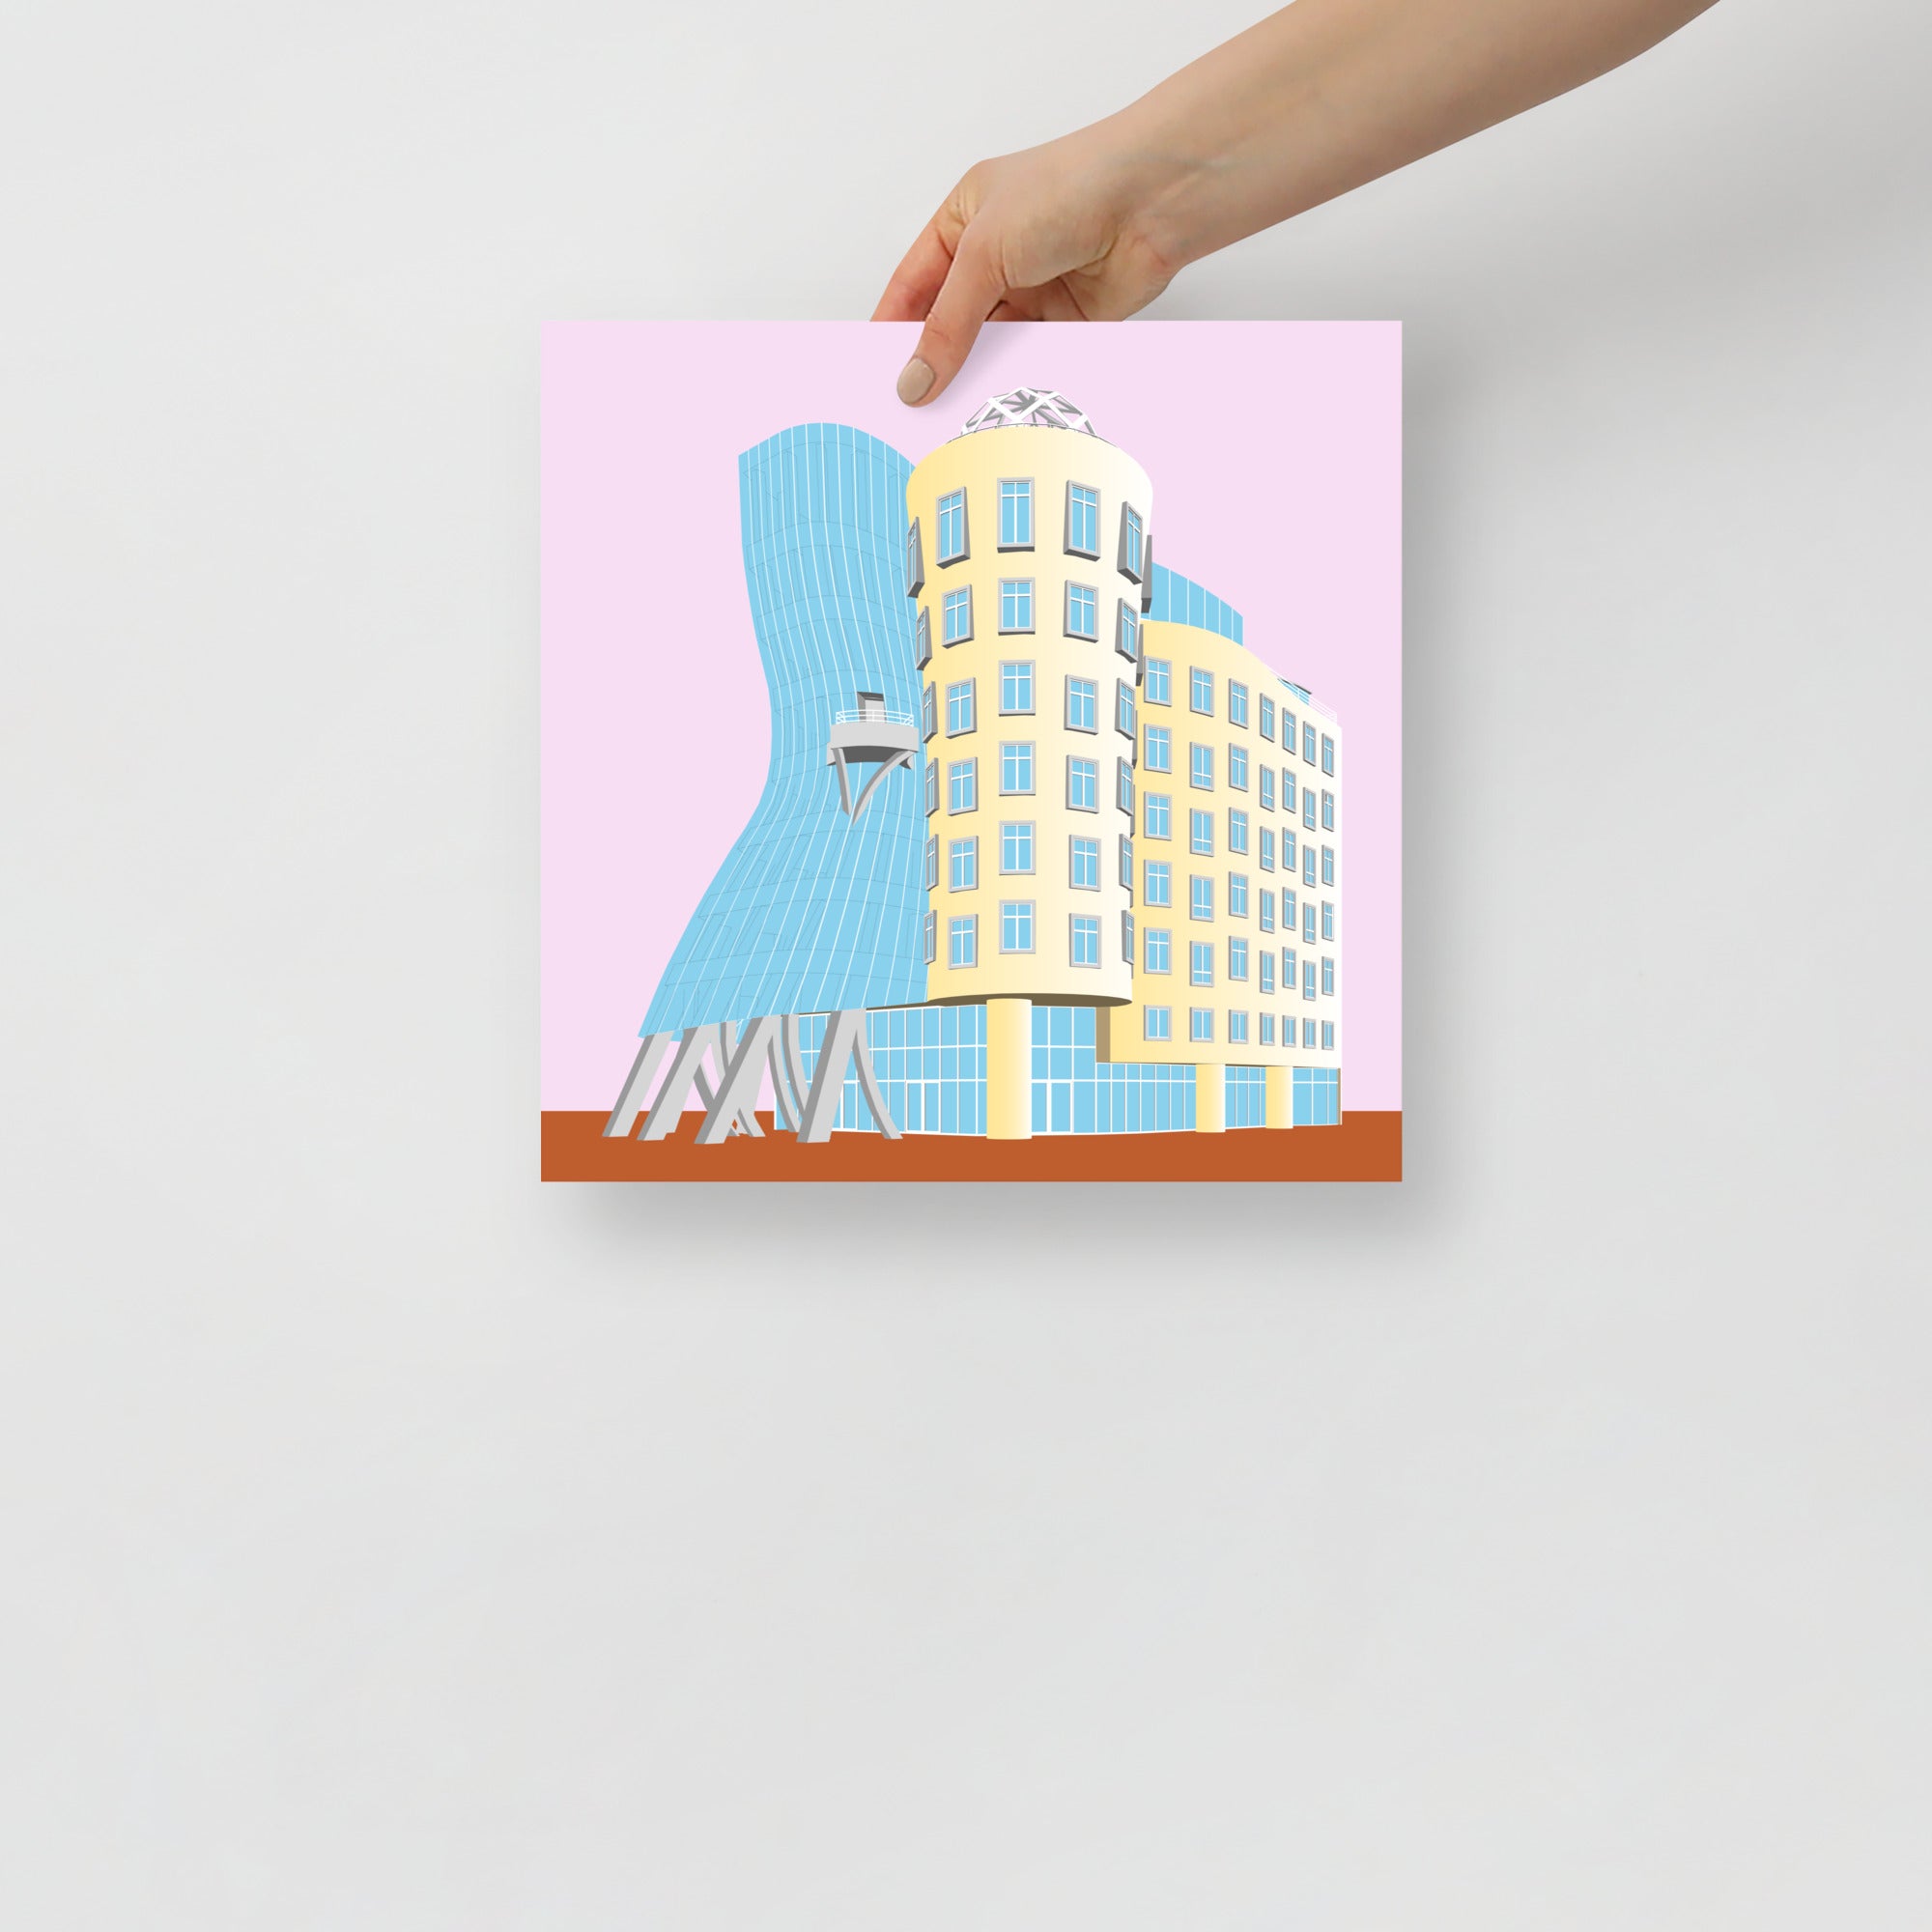 Dancing House Posters